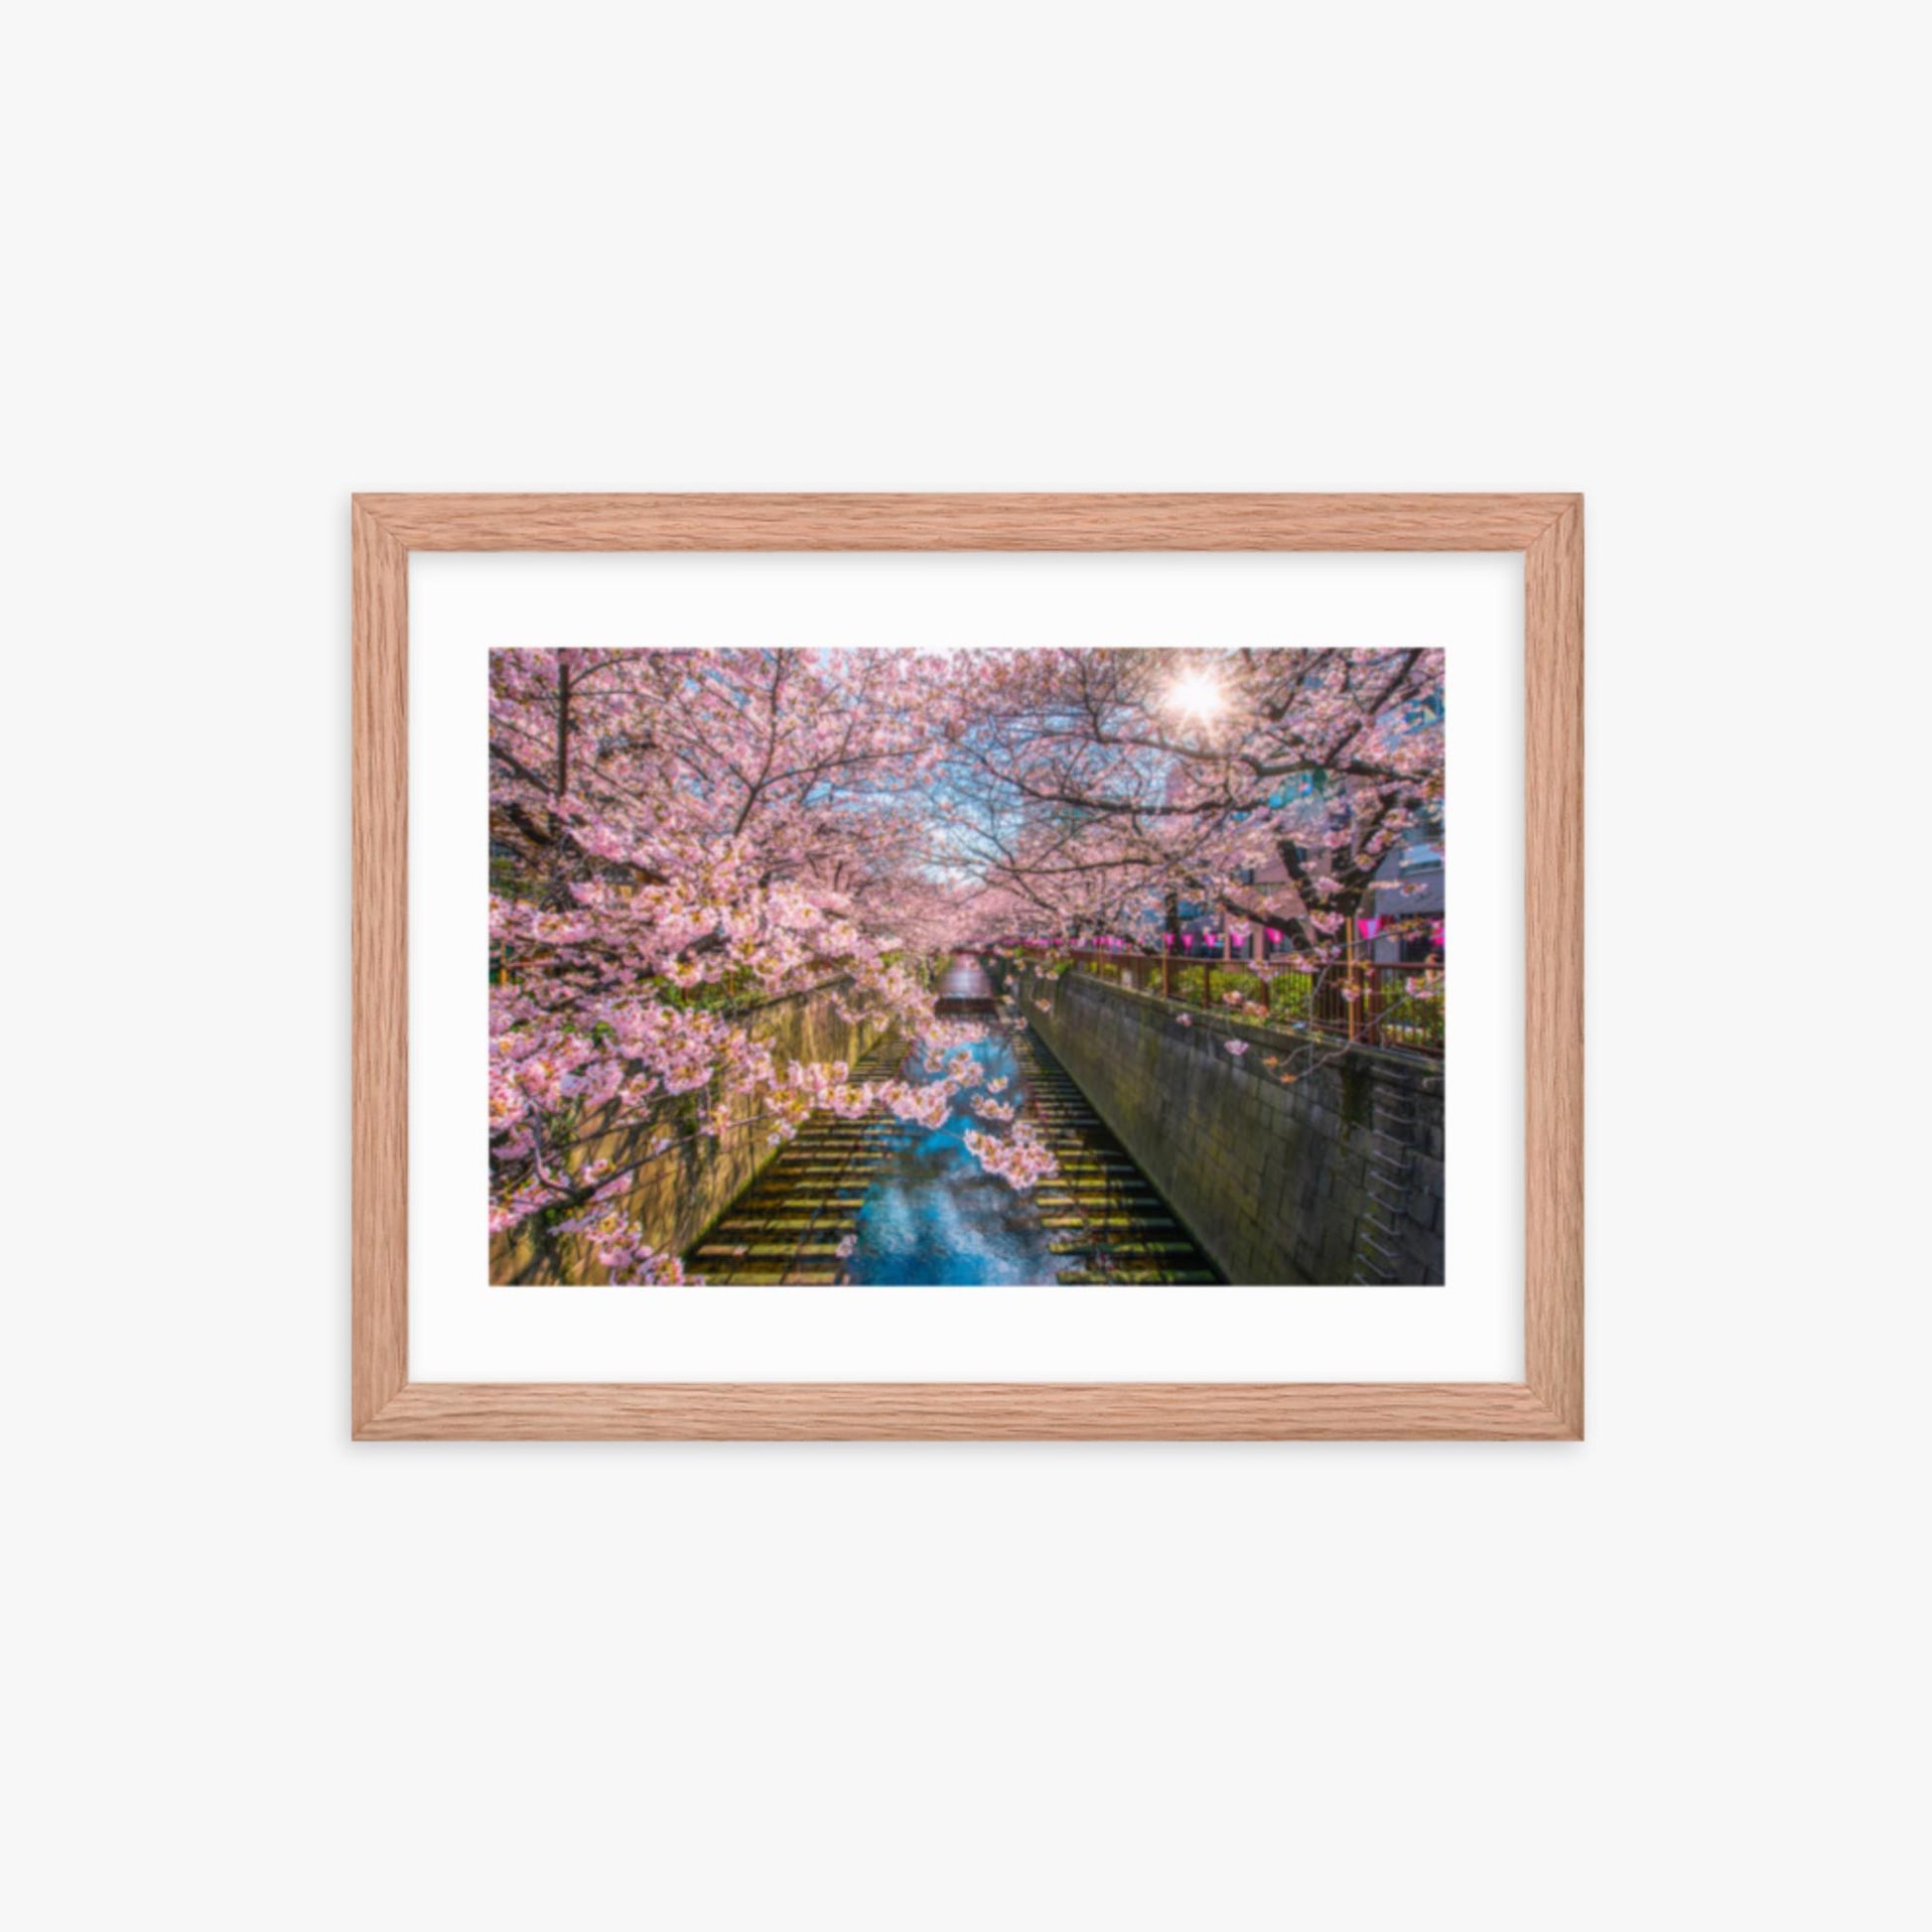 Cherry blossom sakura lined Meguro Canal in Tokyo 12x16 in Poster With Oak Frame